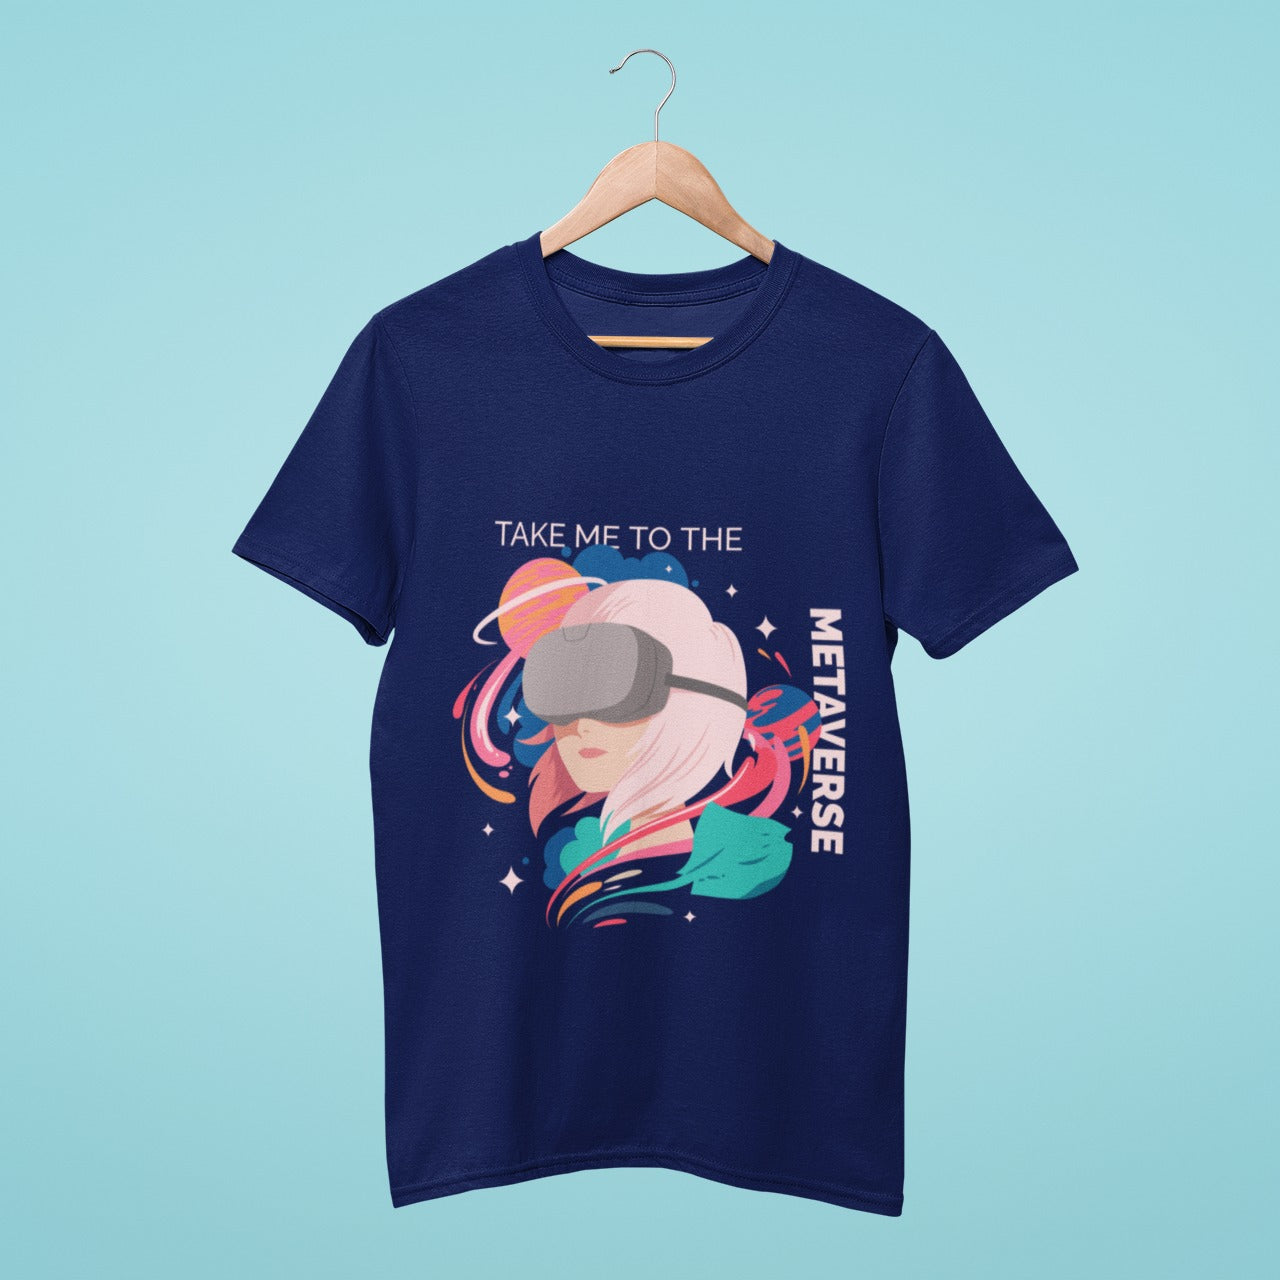 Step into a new reality with our navy blue t-shirt featuring 'Take Me to the Metaverse' slogan and a girl wearing VR goggles. Get ready to explore endless possibilities beyond the limits of the physical world.